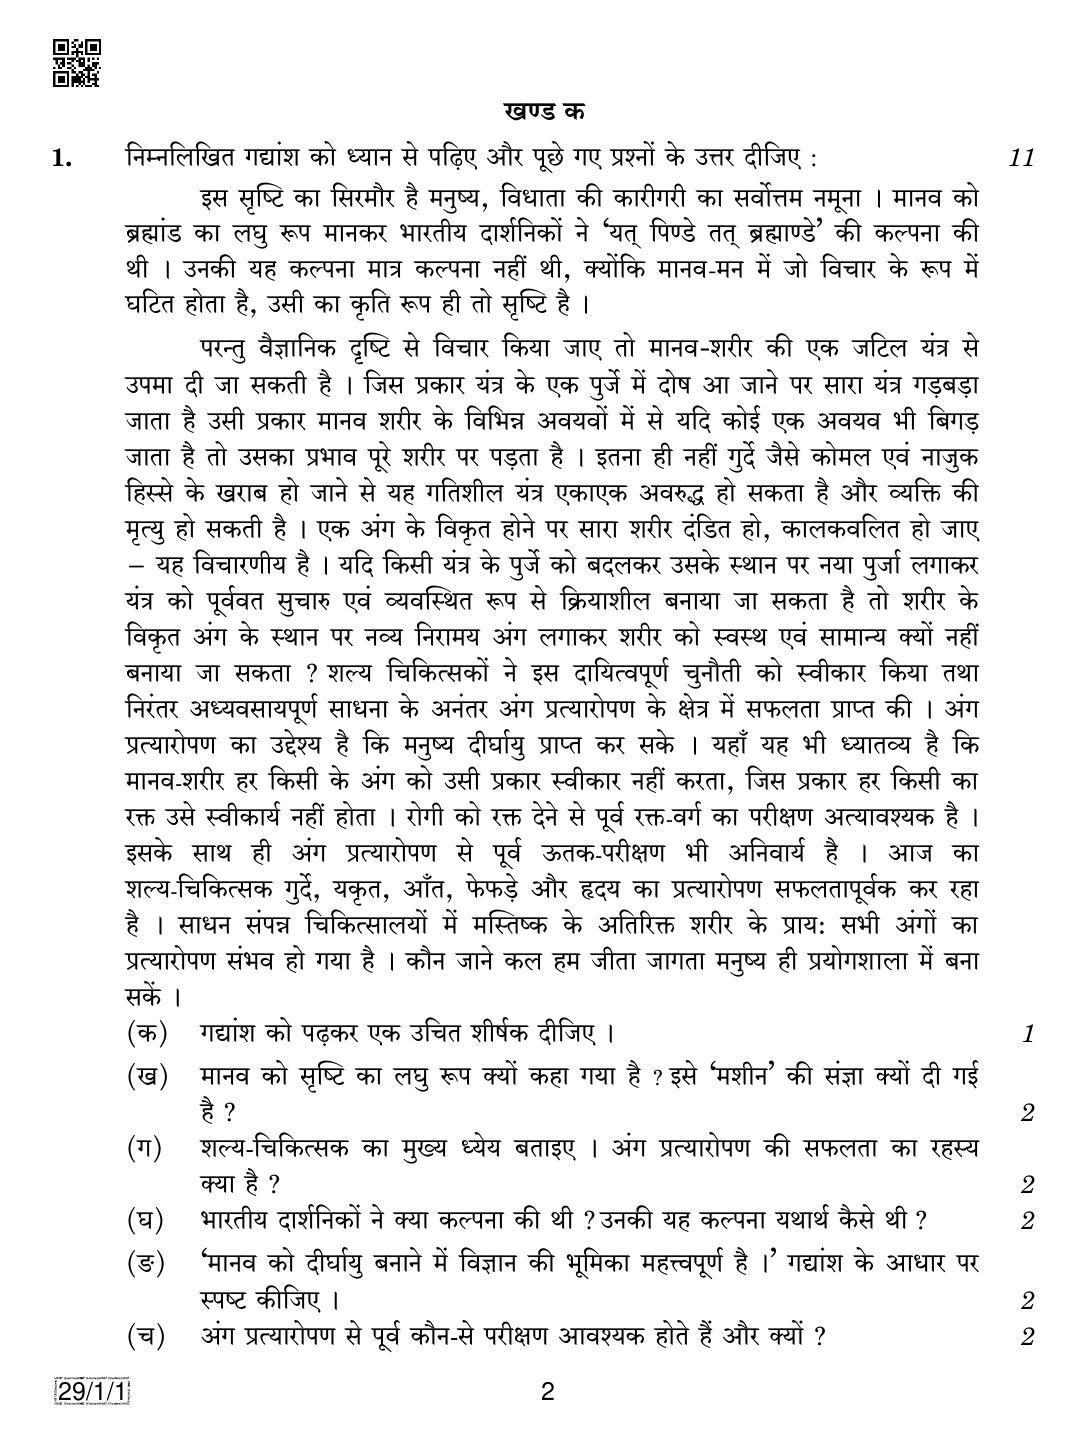 CBSE Class 12 29-1-1 HINDI ELECTIVE 2019 Compartment Question Paper - Page 2